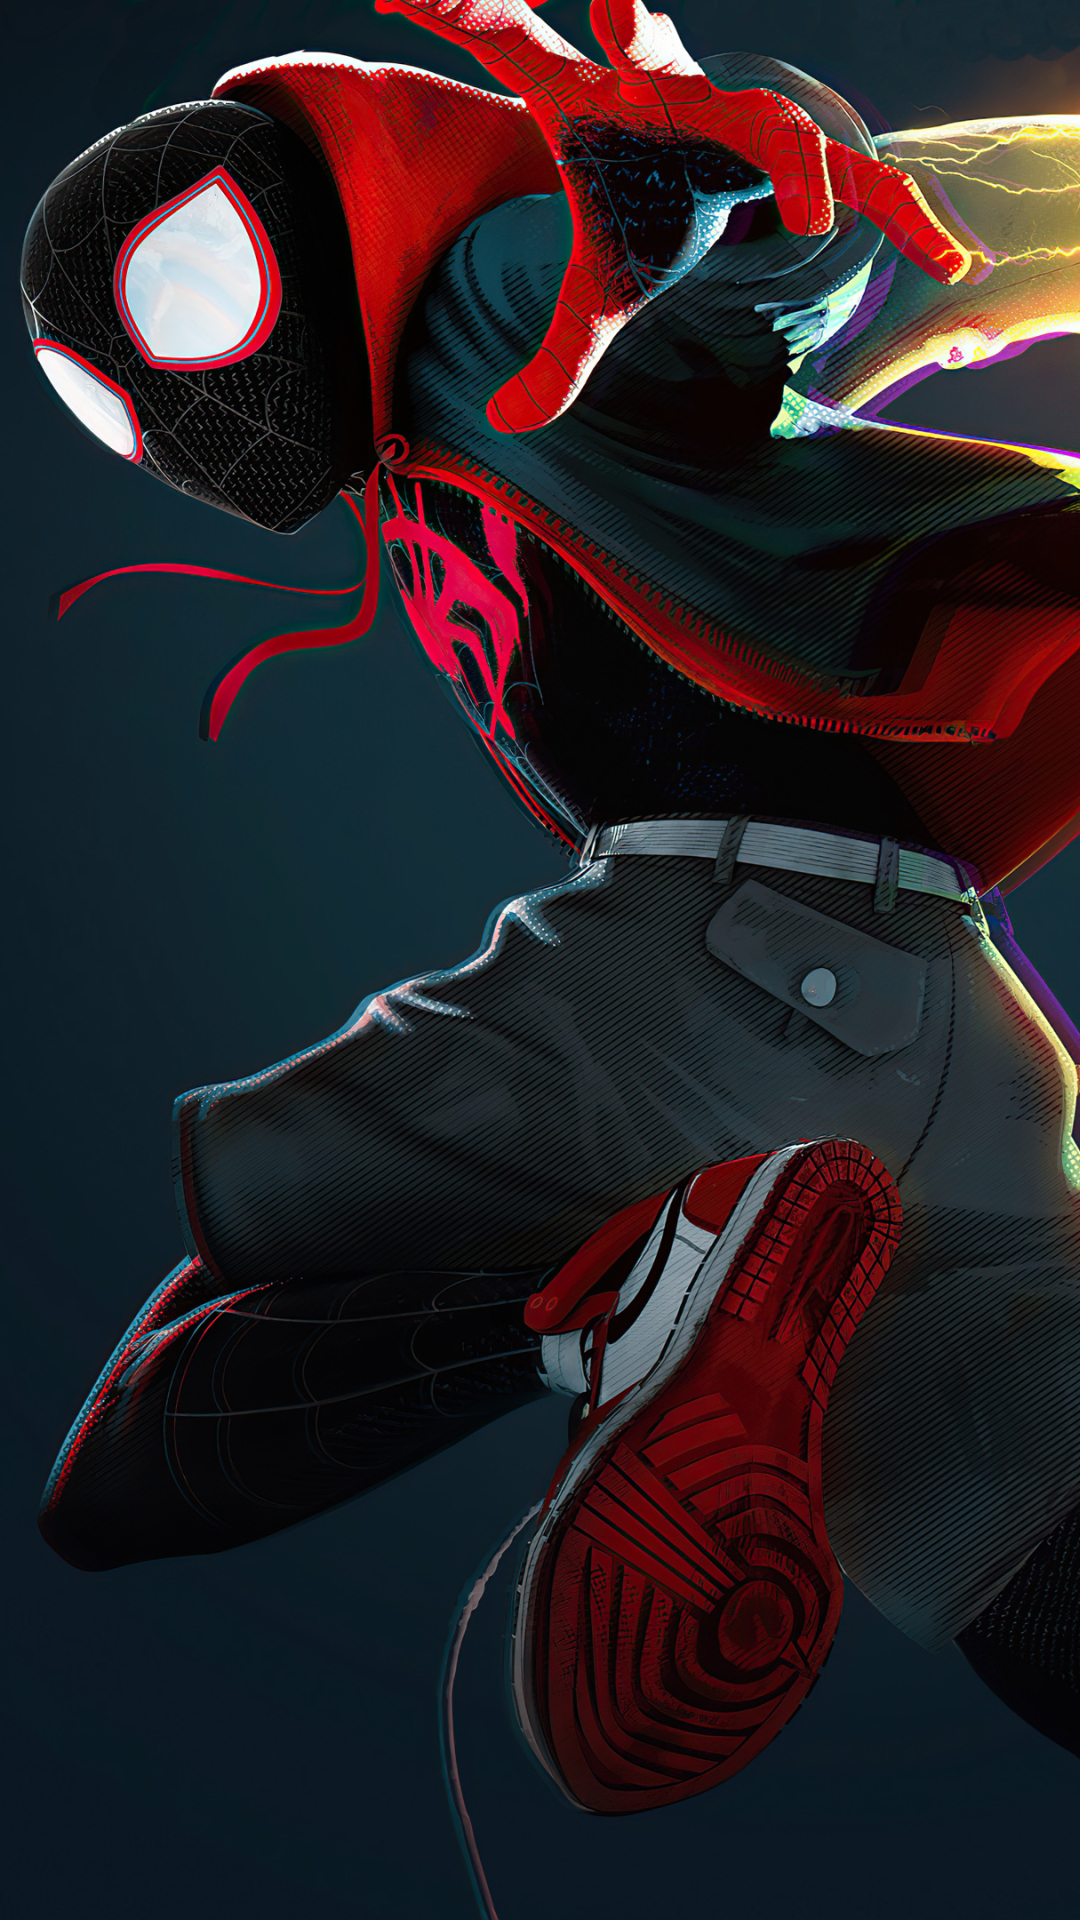 1080x1920 Resolution 4k Spider Man Miles Morales 2020 Iphone 7 6s 6